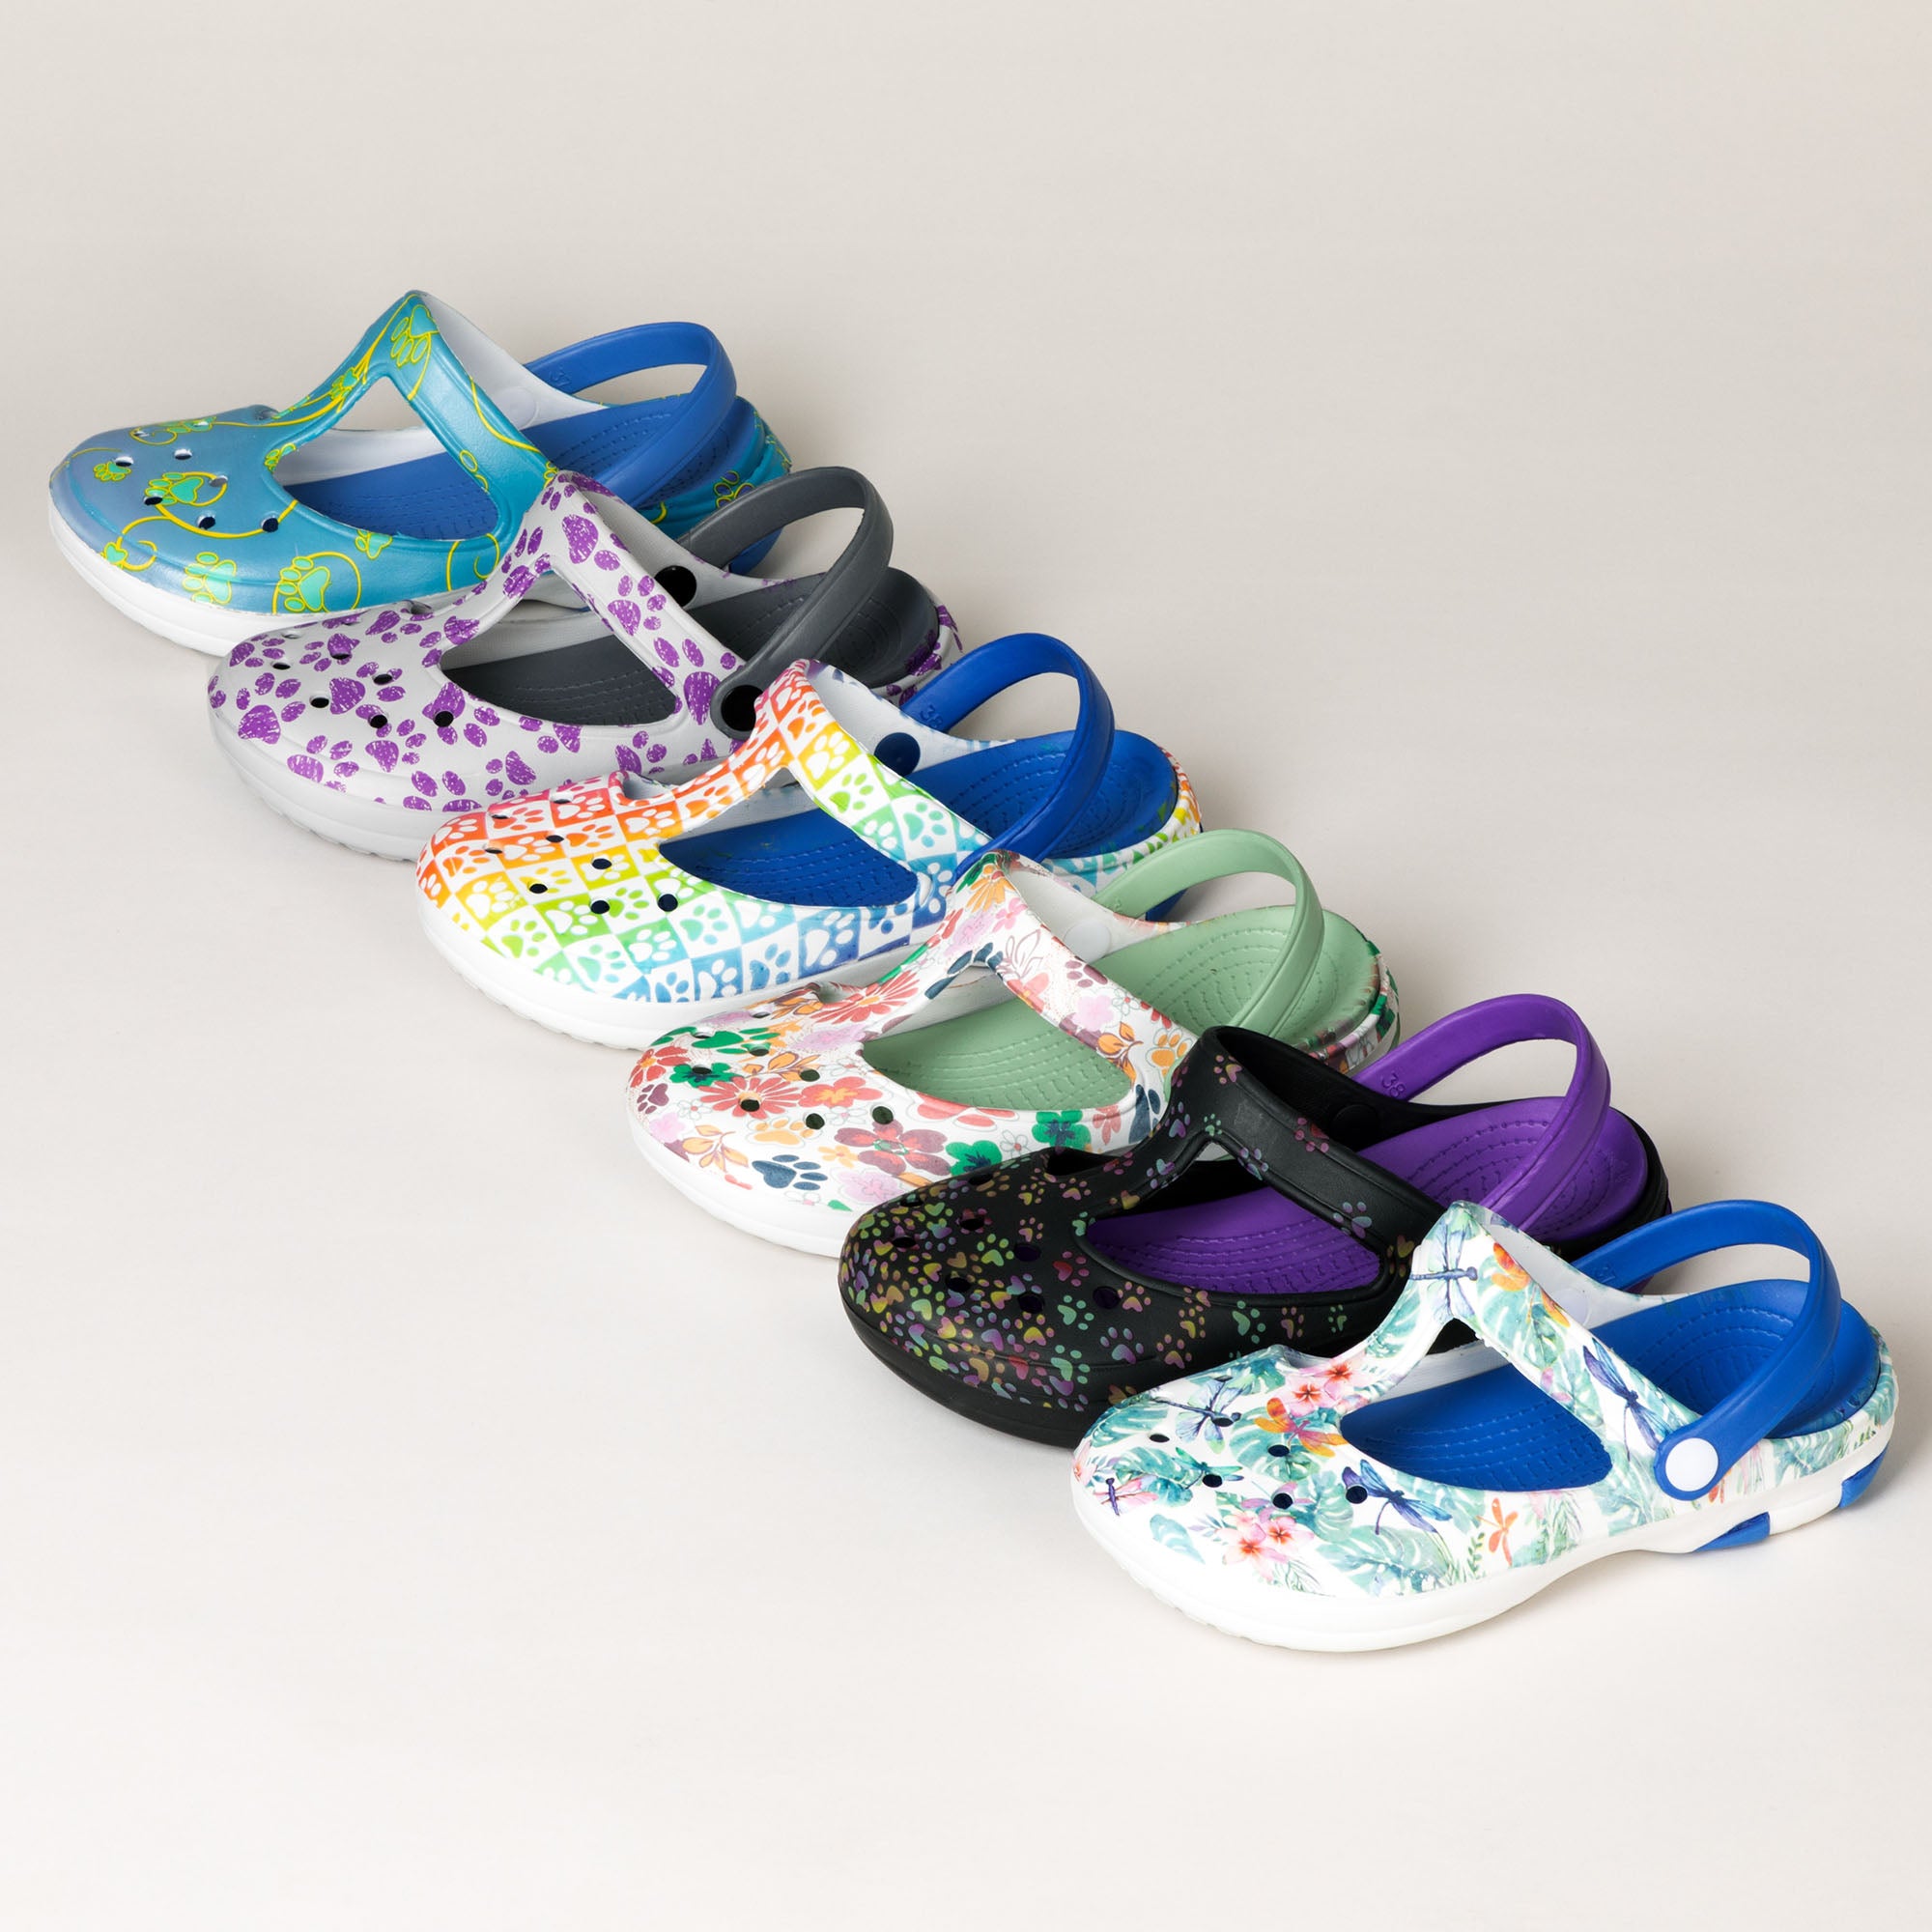 Multicolored Mary Jane Clogs - Flowers & Paws - 7